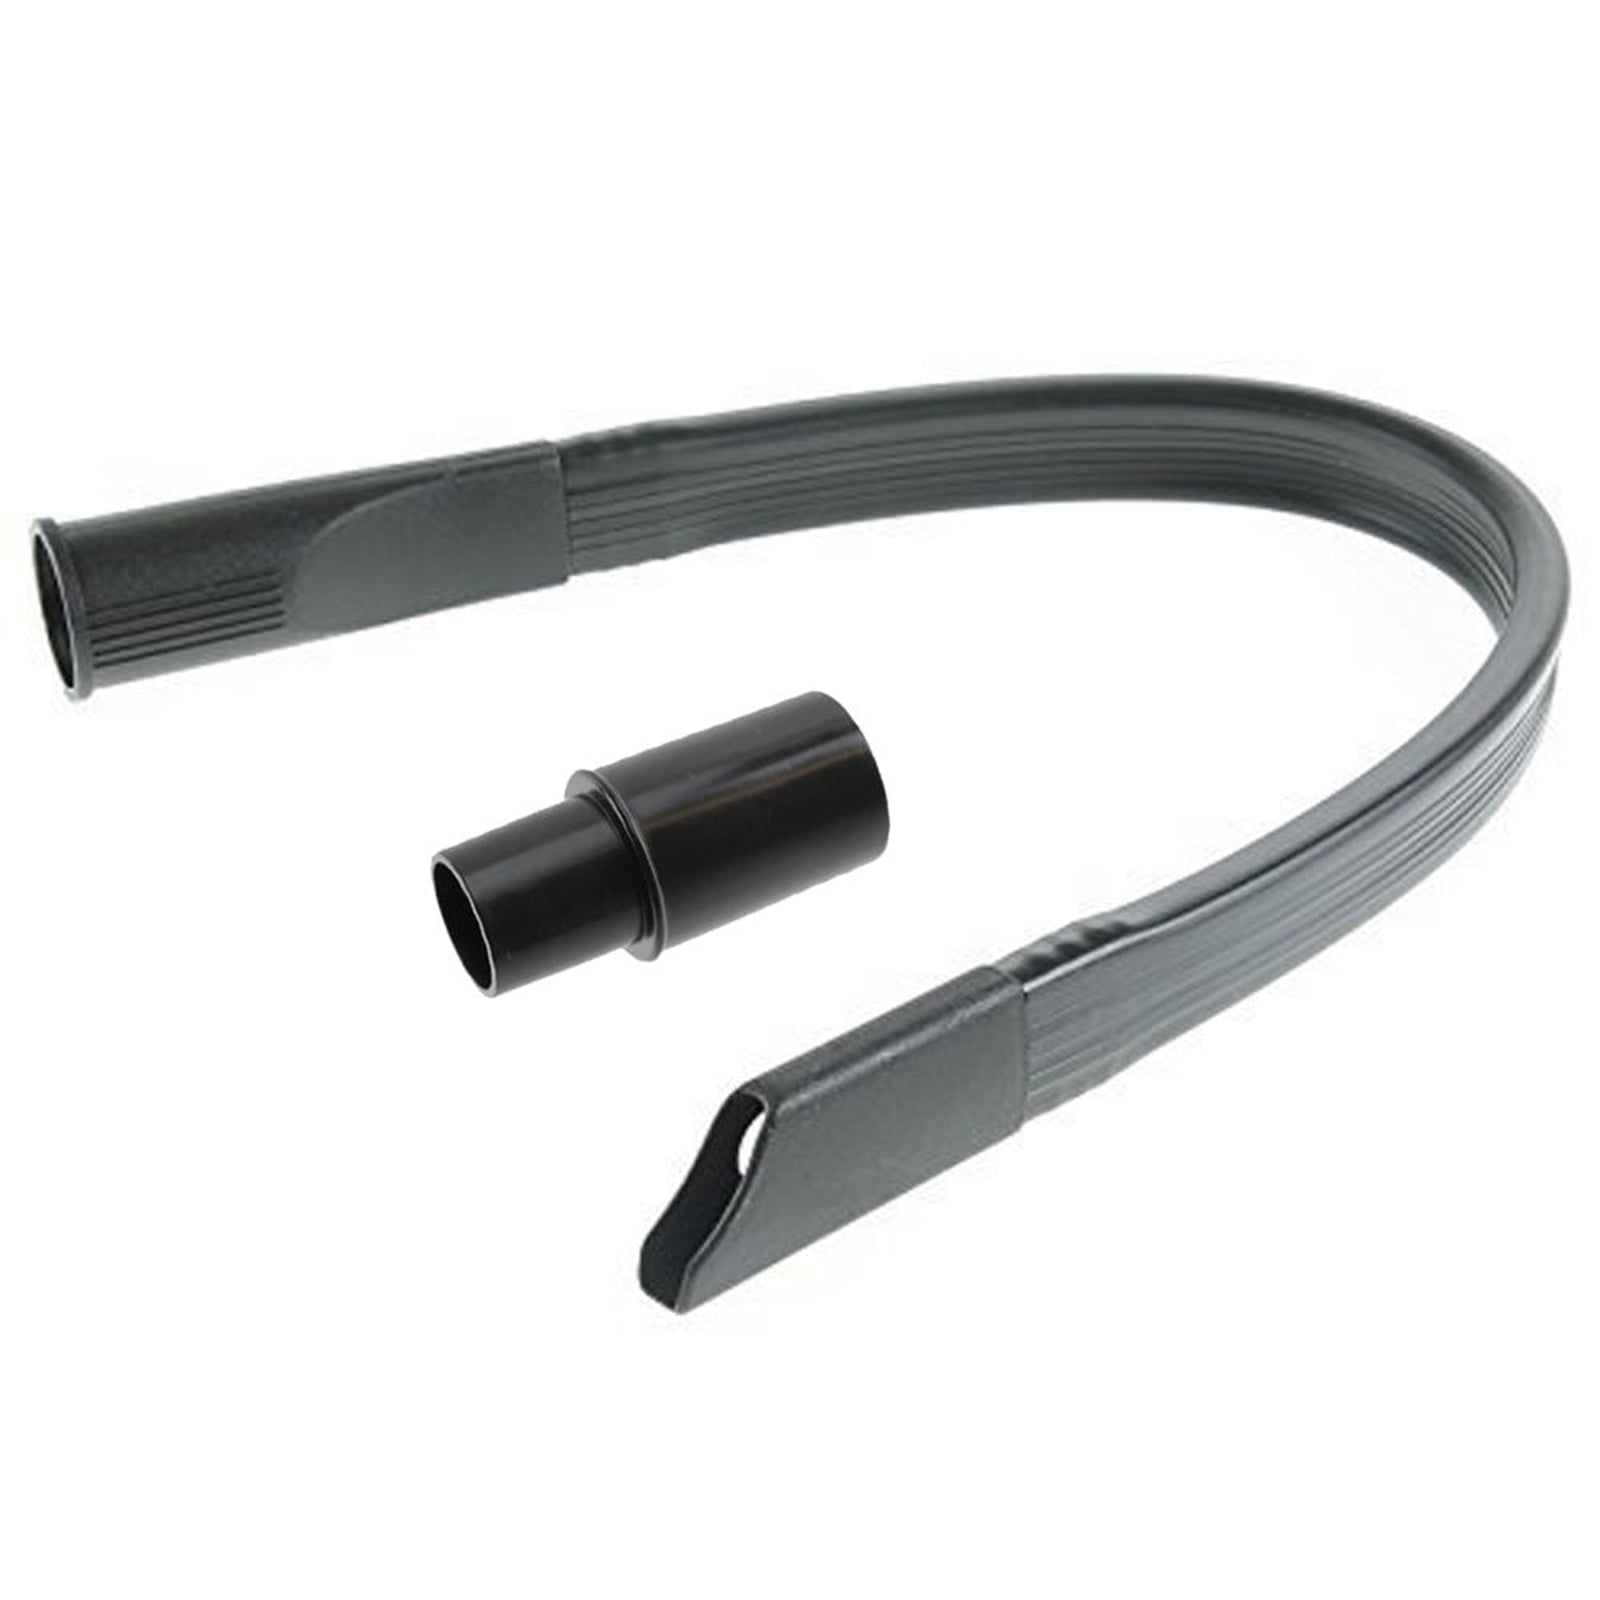 Flexible Crevice Tool Extra Long compatible with NATIONAL Vacuum Cleaner (32mm or 35mm)